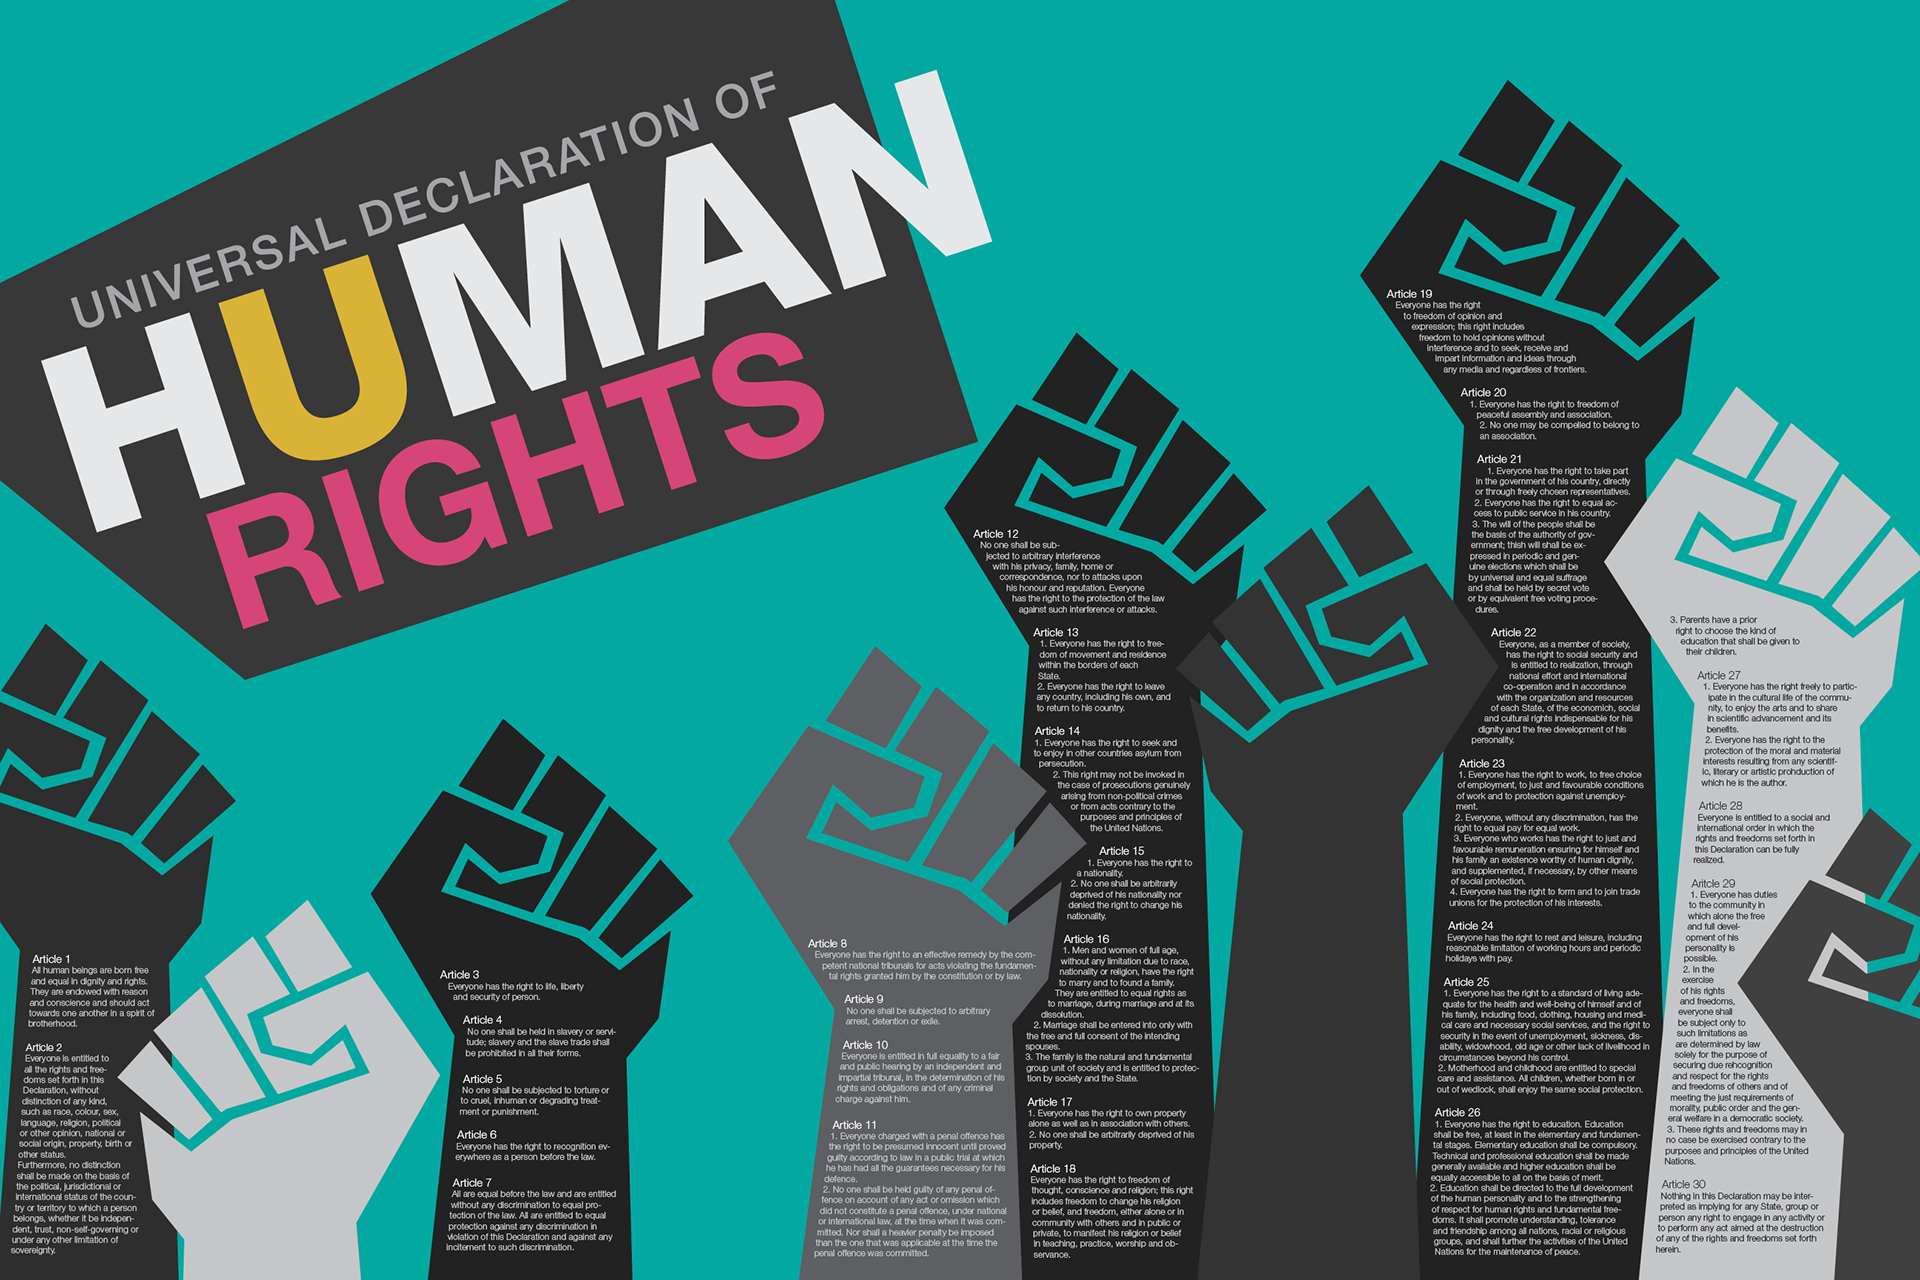 Poster representation of the Universal Declaration of Human Rights by artist Larissa Punzalan. The artist explains: "The project’s objective was to create a poster for the 30 articles of the Universal Declaration of Human Rights. To make the poster visually appealing, the bold san serif fonts and bright colors were used. The background is also given a bold teal blue color and the fist graphics have a monochrome palette to contrast with the bolder background. The fists were used as a background for the article texts, as it is often used as a symbol for the human rights."